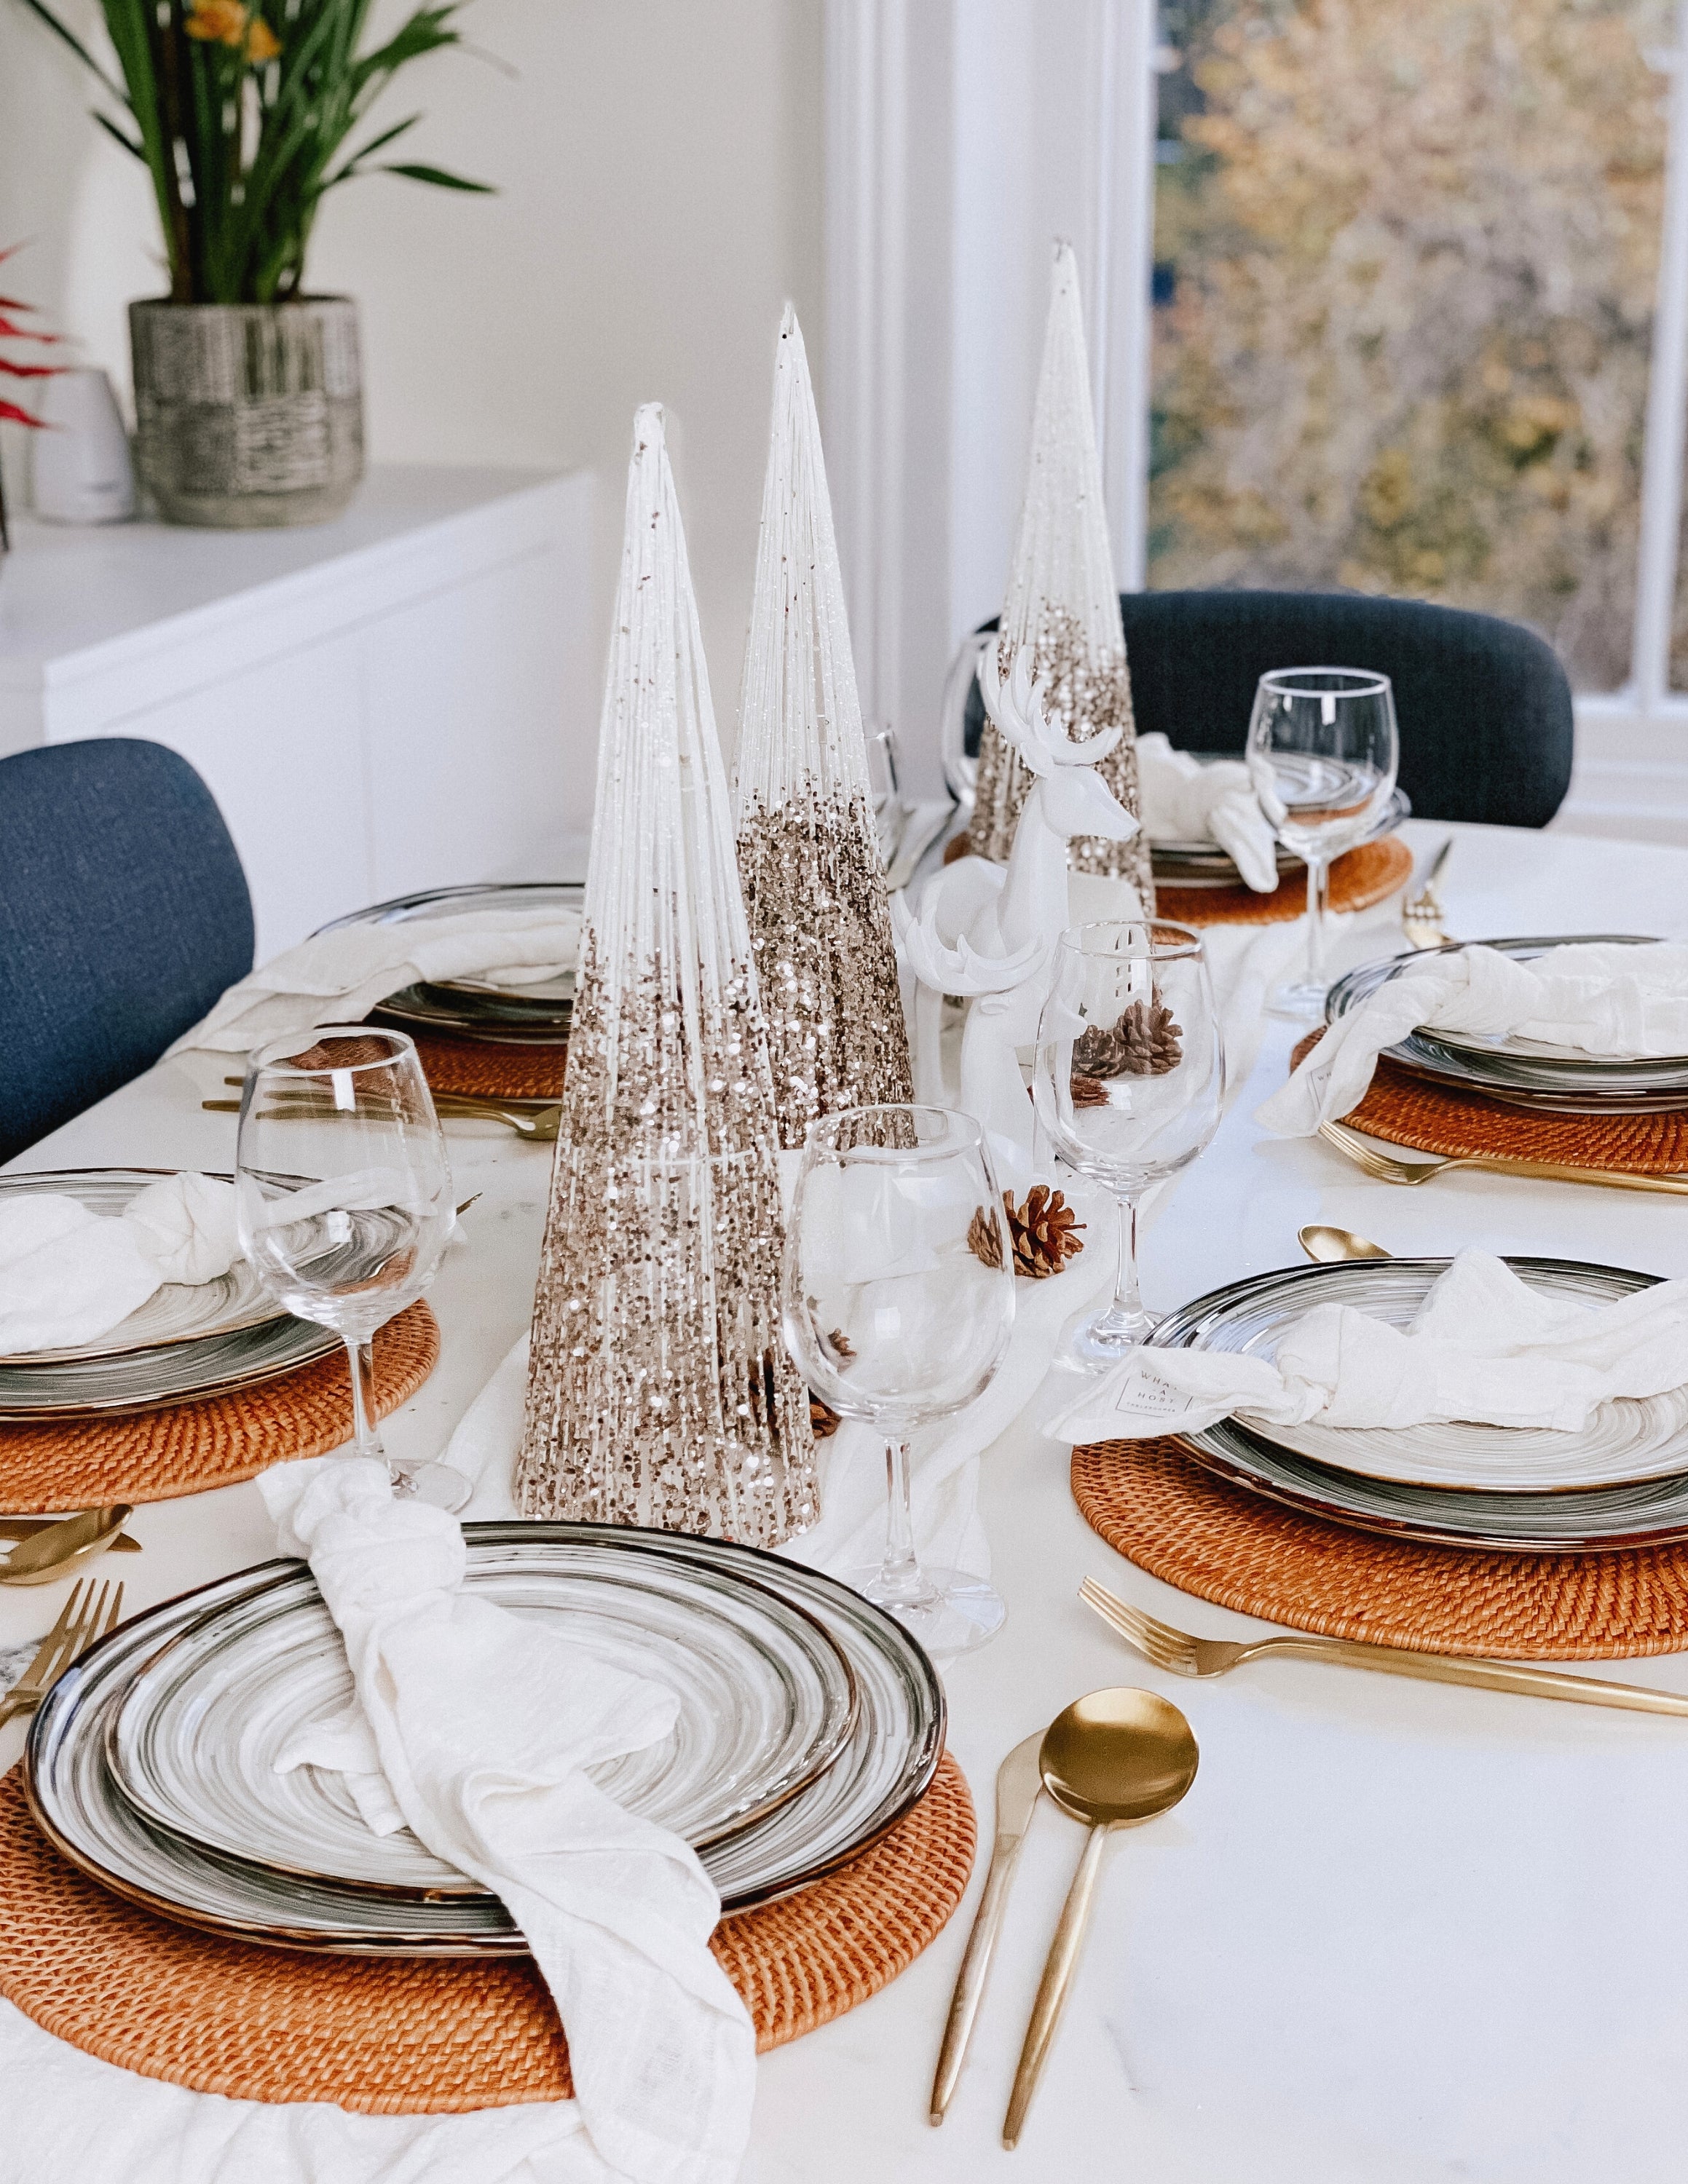 What a Host Home Decor: Christmas Tablescape With Geometric Decorative Christmas Deers, Scandi Houses, Rattan Placemats, Porcelain Plates Set Tableware, White and Gold Christmas Table Pine Cones, Gold Cutlery Stainless Steel Set and Rustic Cotton Gauze Table Textiles